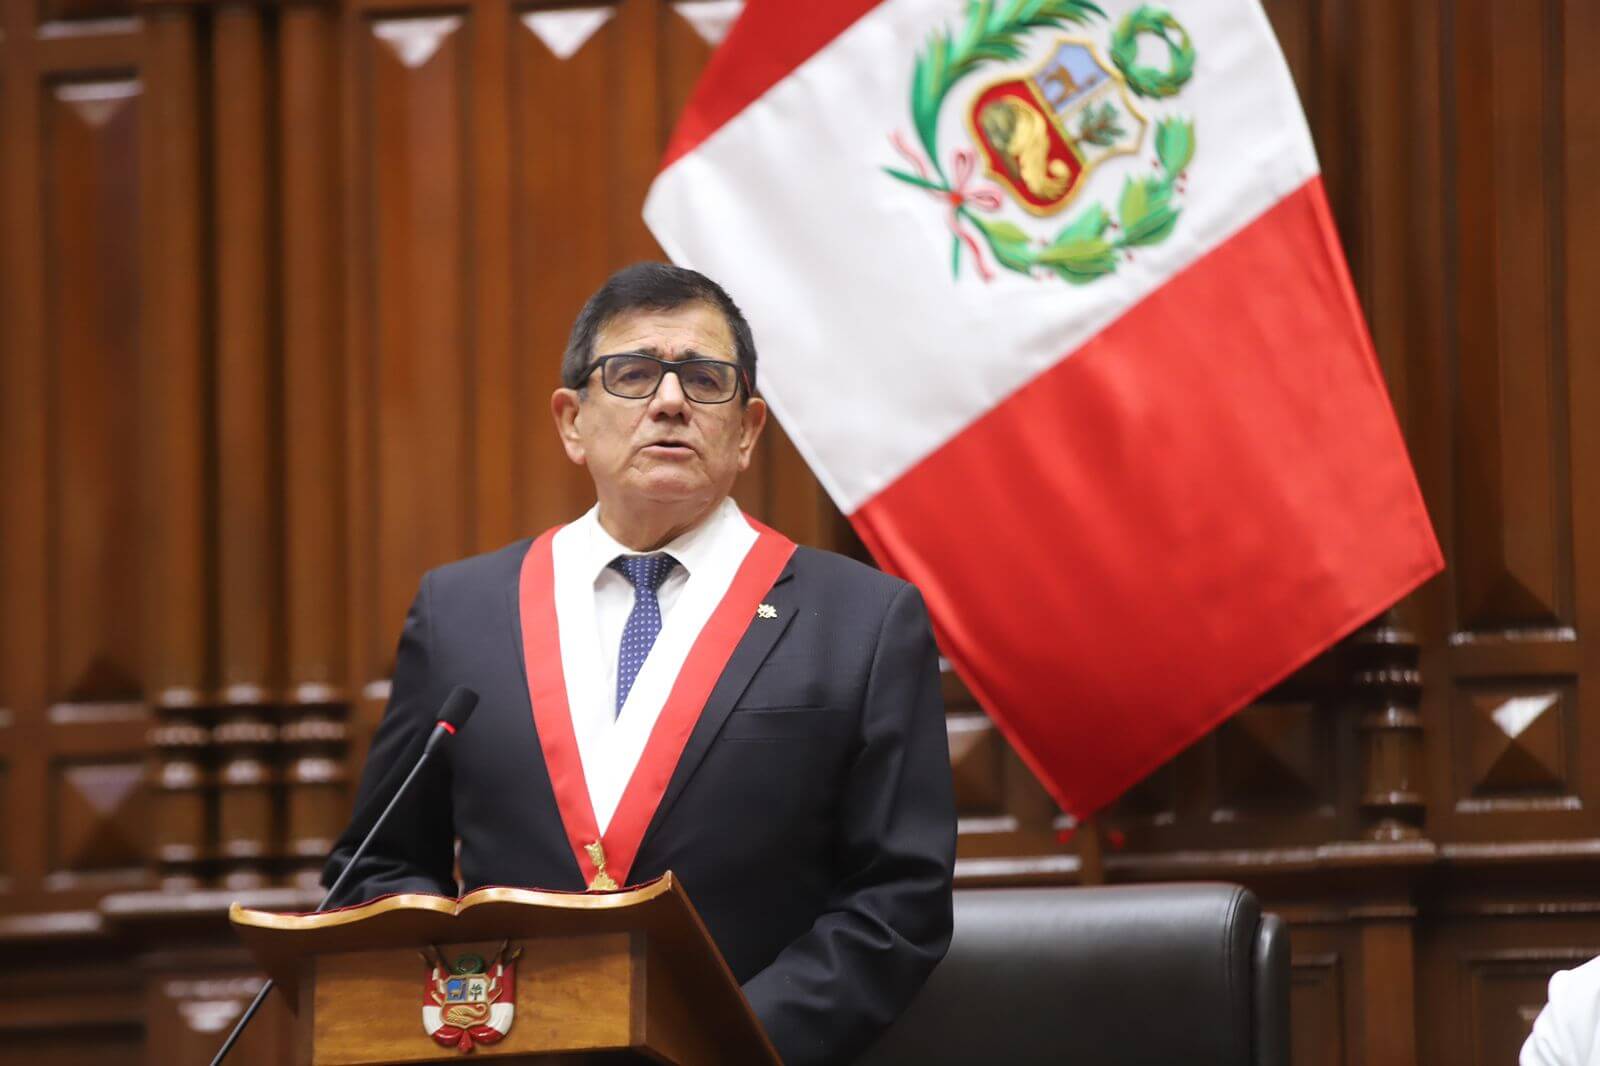 José Williams, the former military general now in charge of Peru’s Congress